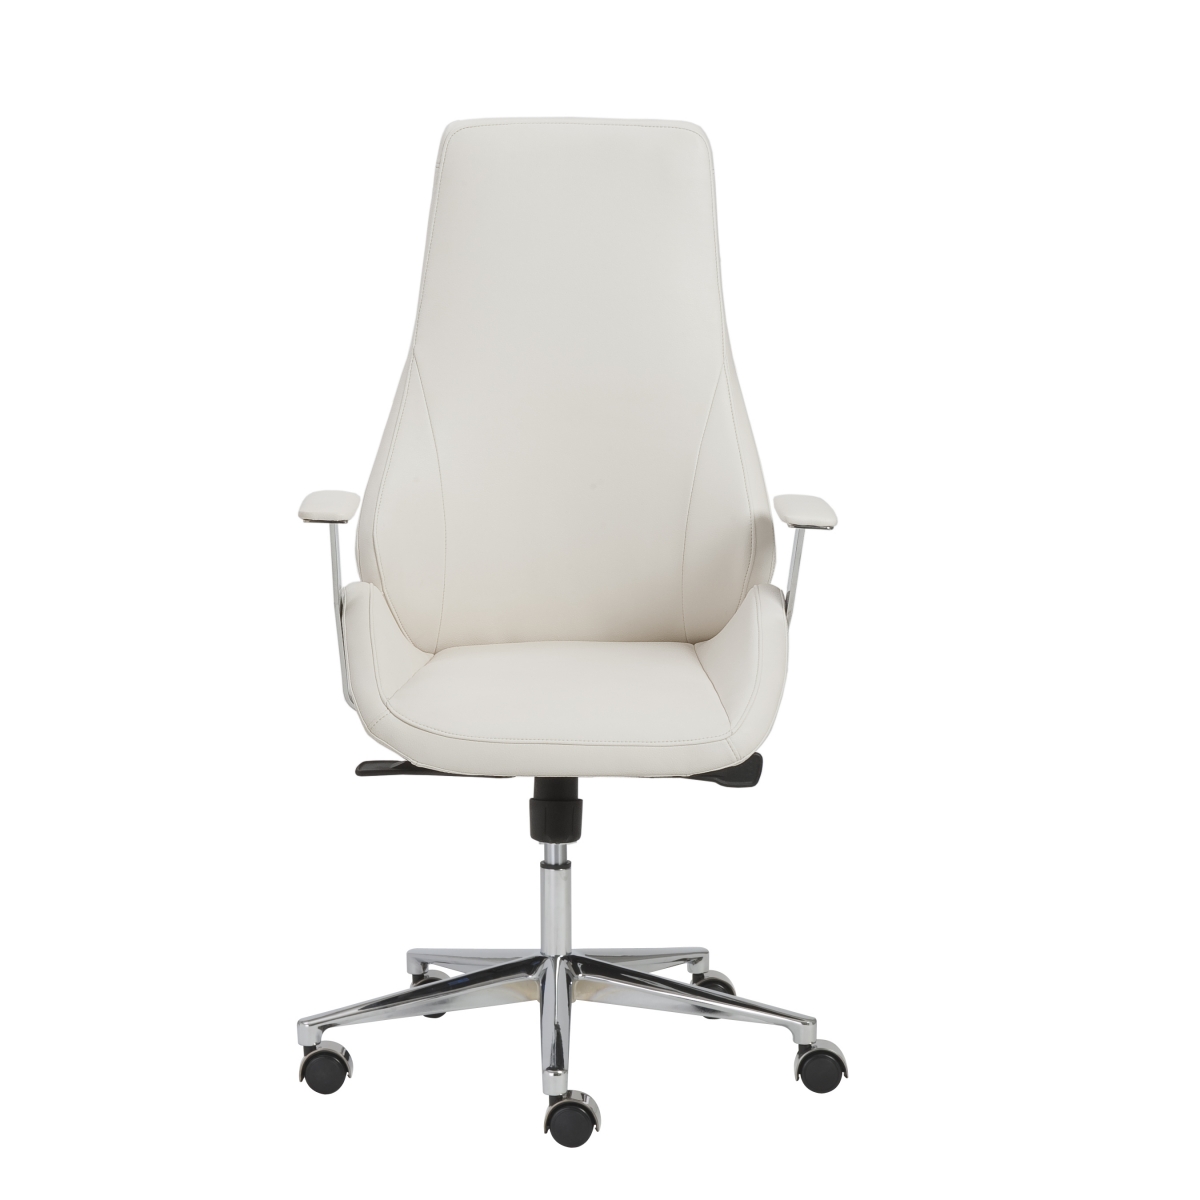 Bergen High Back Executive Chair -In Stock # 1002-S